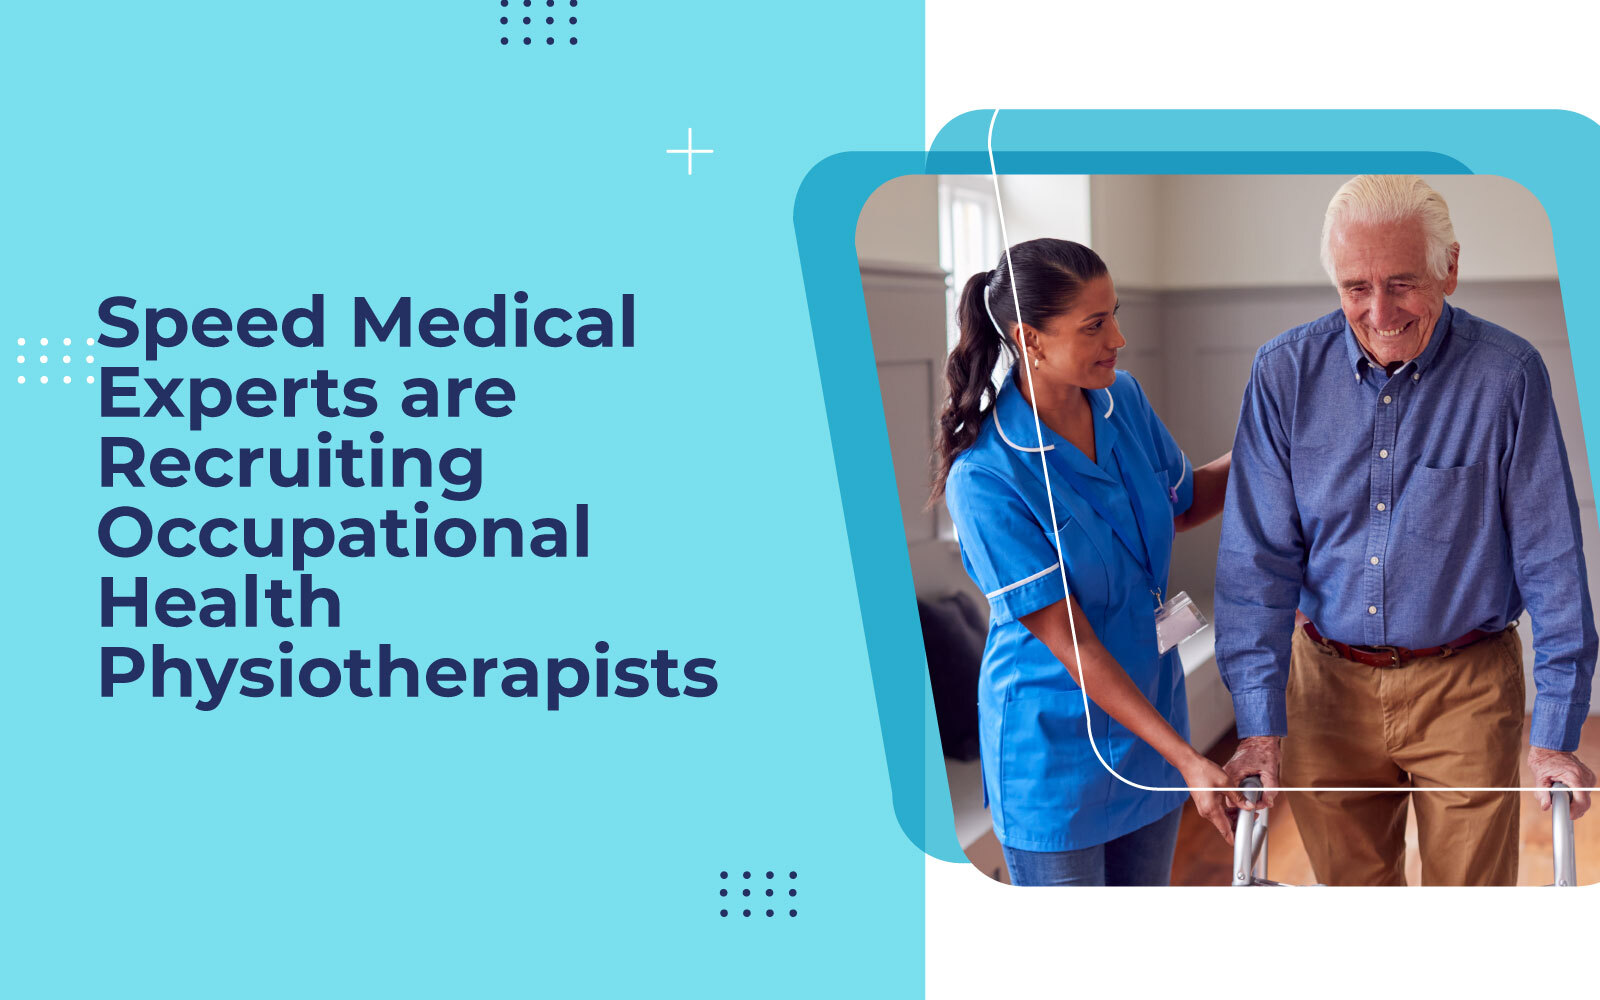 Speed Medical are Recruiting Occupational Health Physiotherapists